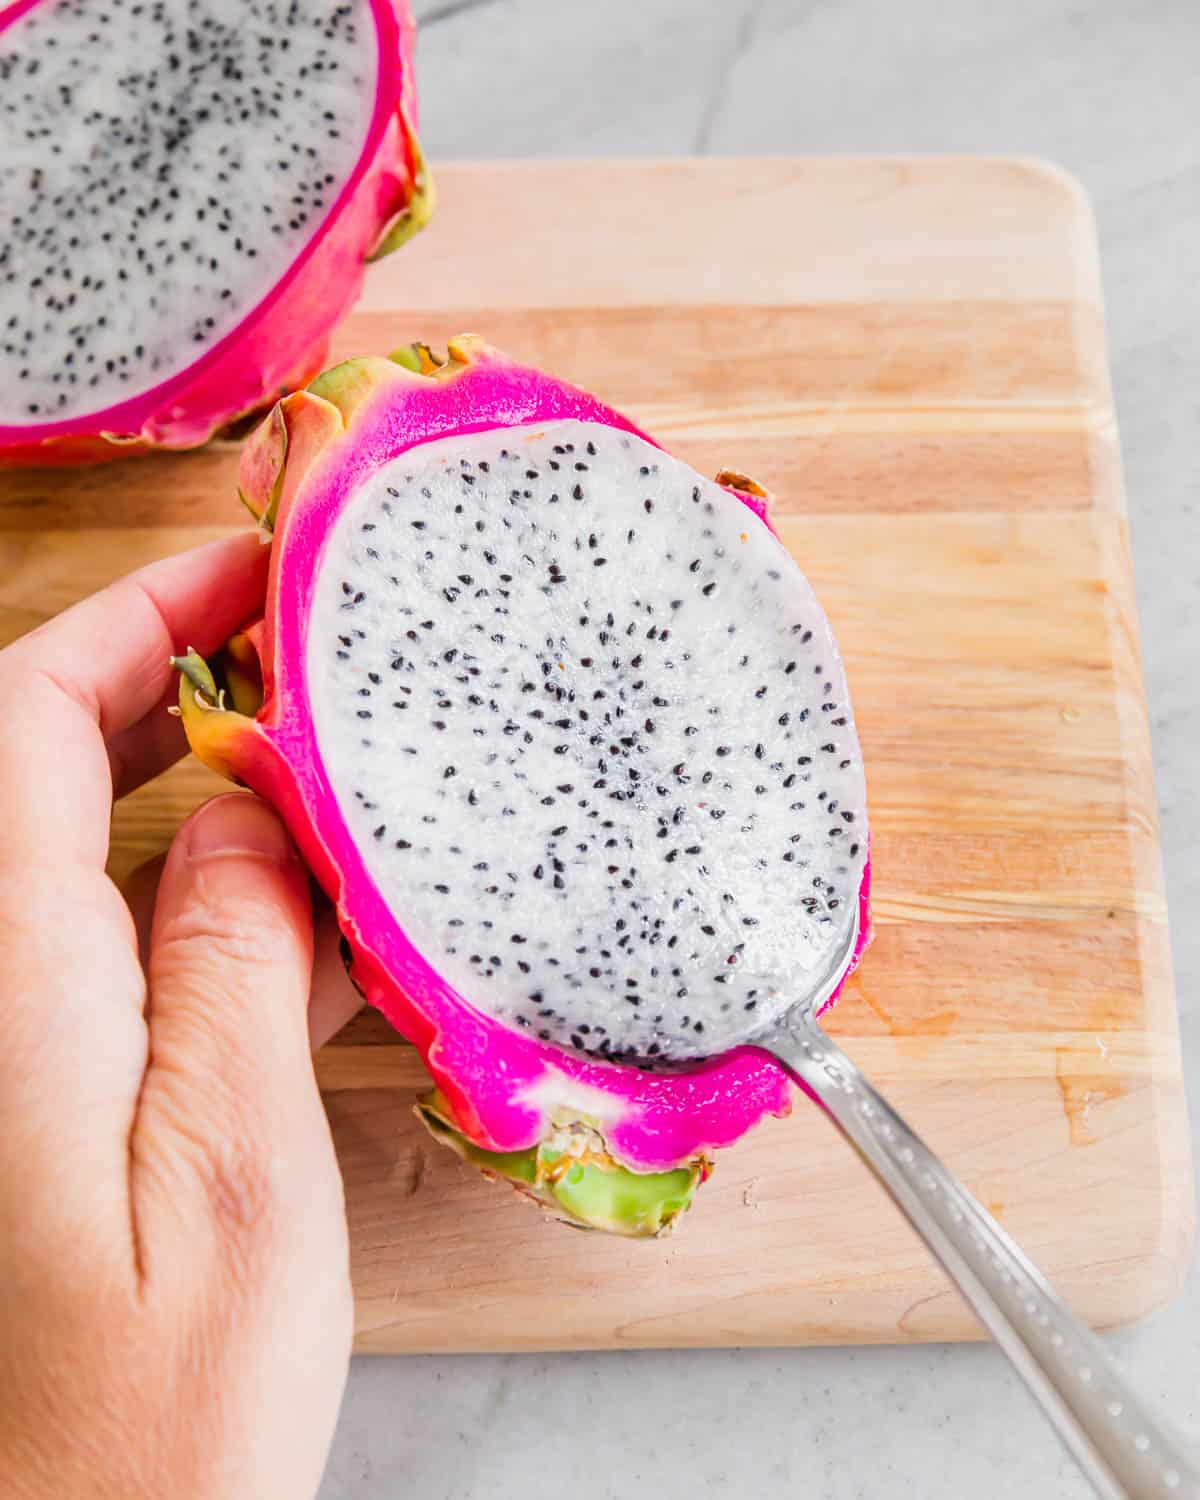 Scooping dragonfruit out of the peel with a spoon.